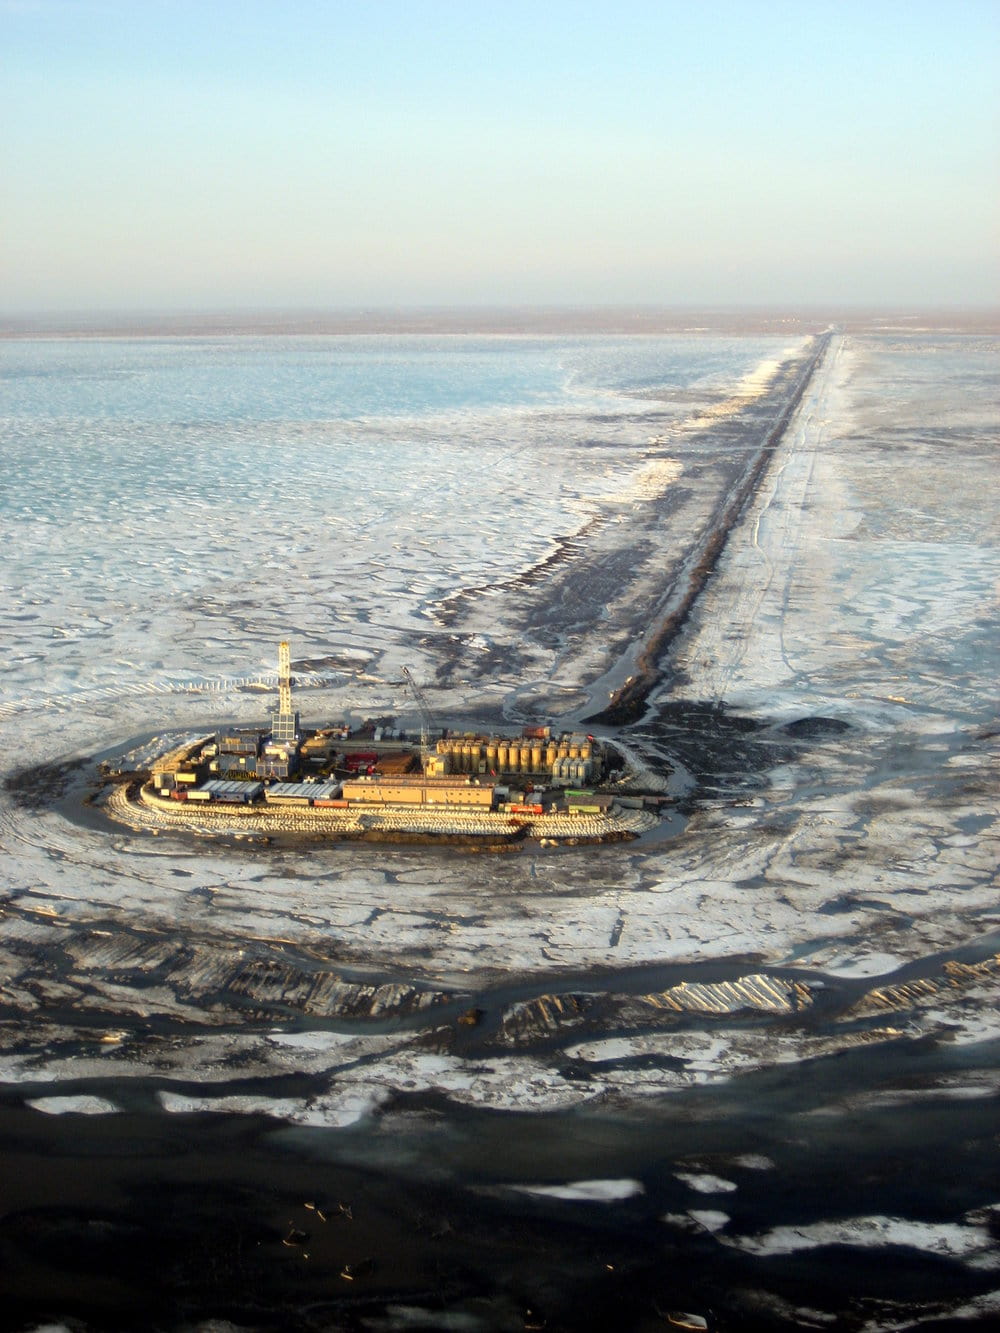 Oooguruk development, which represented the third offshore production facility to be constructed in the Alaskan Beaufort Sea, is partially protected from wave and ice attack by virtue of its location in the shallow waters of the Colville River Delta; Source: Coastal Frontiers